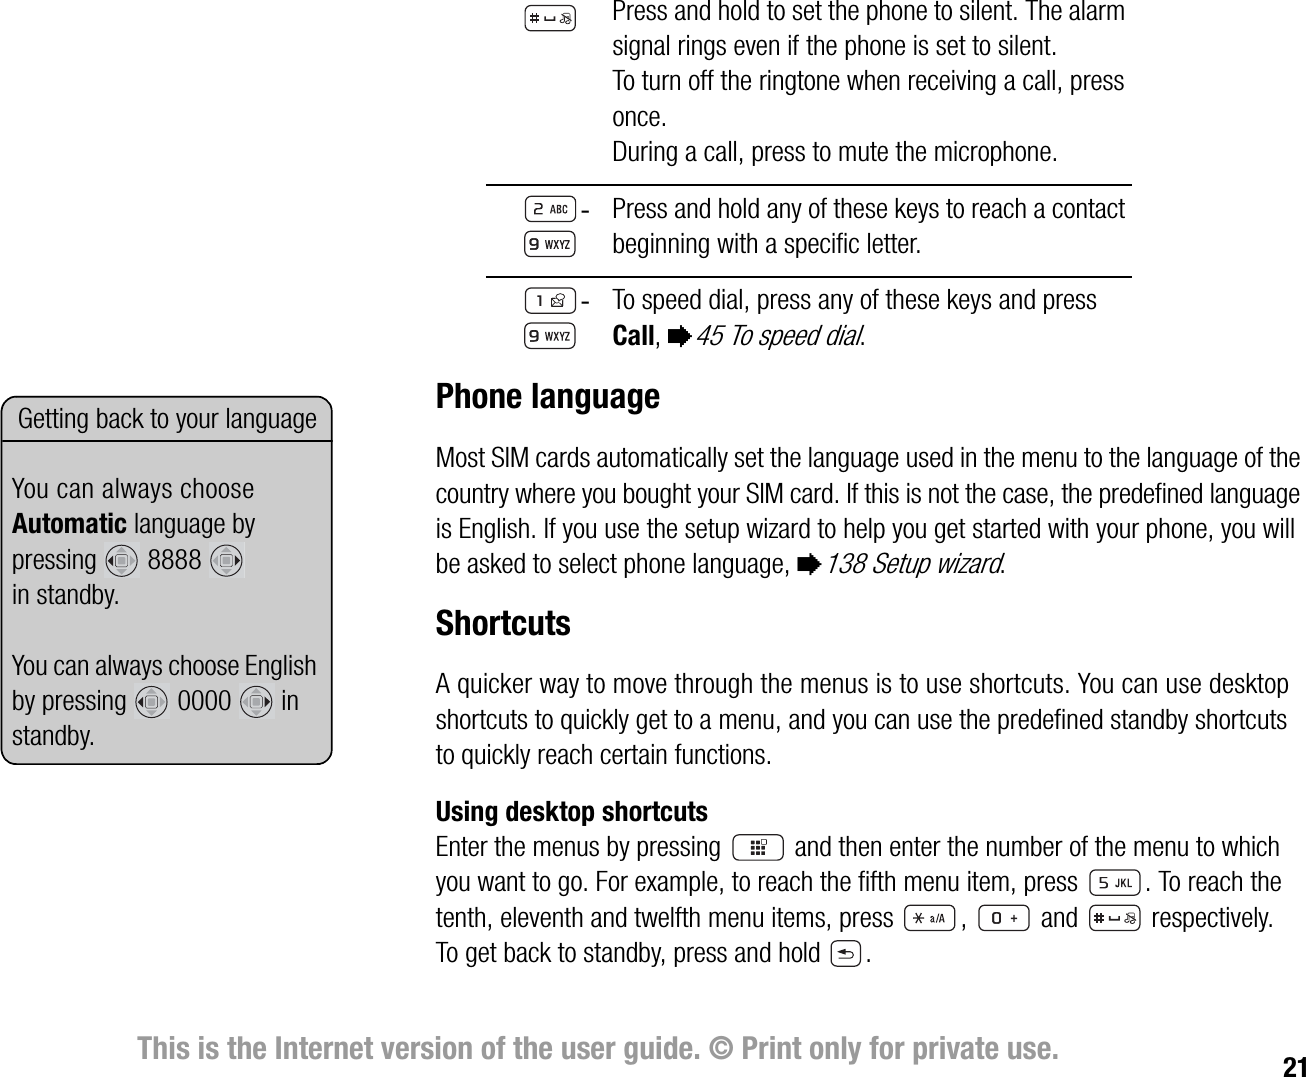 21This is the Internet version of the user guide. © Print only for private use.Phone languageMost SIM cards automatically set the language used in the menu to the language of the country where you bought your SIM card. If this is not the case, the predefined language is English. If you use the setup wizard to help you get started with your phone, you will be asked to select phone language, %138 Setup wizard.ShortcutsA quicker way to move through the menus is to use shortcuts. You can use desktop shortcuts to quickly get to a menu, and you can use the predefined standby shortcuts to quickly reach certain functions.Using desktop shortcutsEnter the menus by pressing   and then enter the number of the menu to which you want to go. For example, to reach the fifth menu item, press  . To reach the tenth, eleventh and twelfth menu items, press  ,  and  respectively. To get back to standby, press and hold  .Press and hold to set the phone to silent. The alarm signal rings even if the phone is set to silent.To turn off the ringtone when receiving a call, press once.During a call, press to mute the microphone. Press and hold any of these keys to reach a contact beginning with a specific letter.To speed dial, press any of these keys and press Call, %45 To speed dial.Getting back to your languageYou can always choose Automatic language by pressing  8888  in standby.You can always choose English by pressing  0000  in standby.